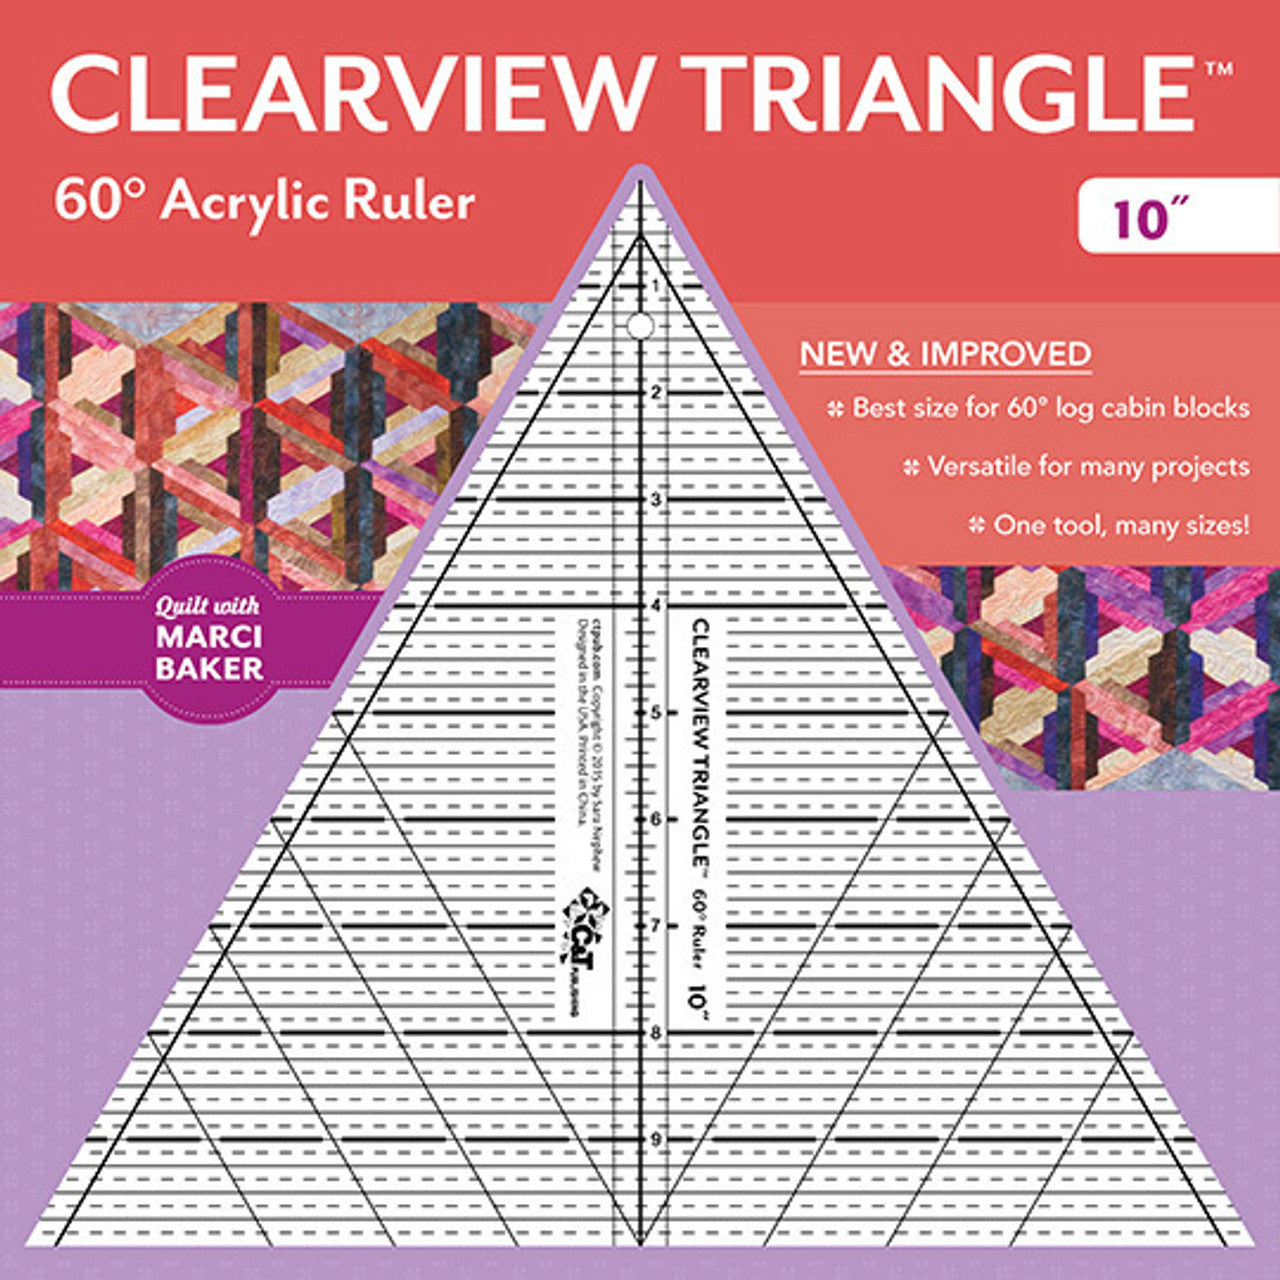 10" Clearview Triangle 60 Degree Acrylic Ruler